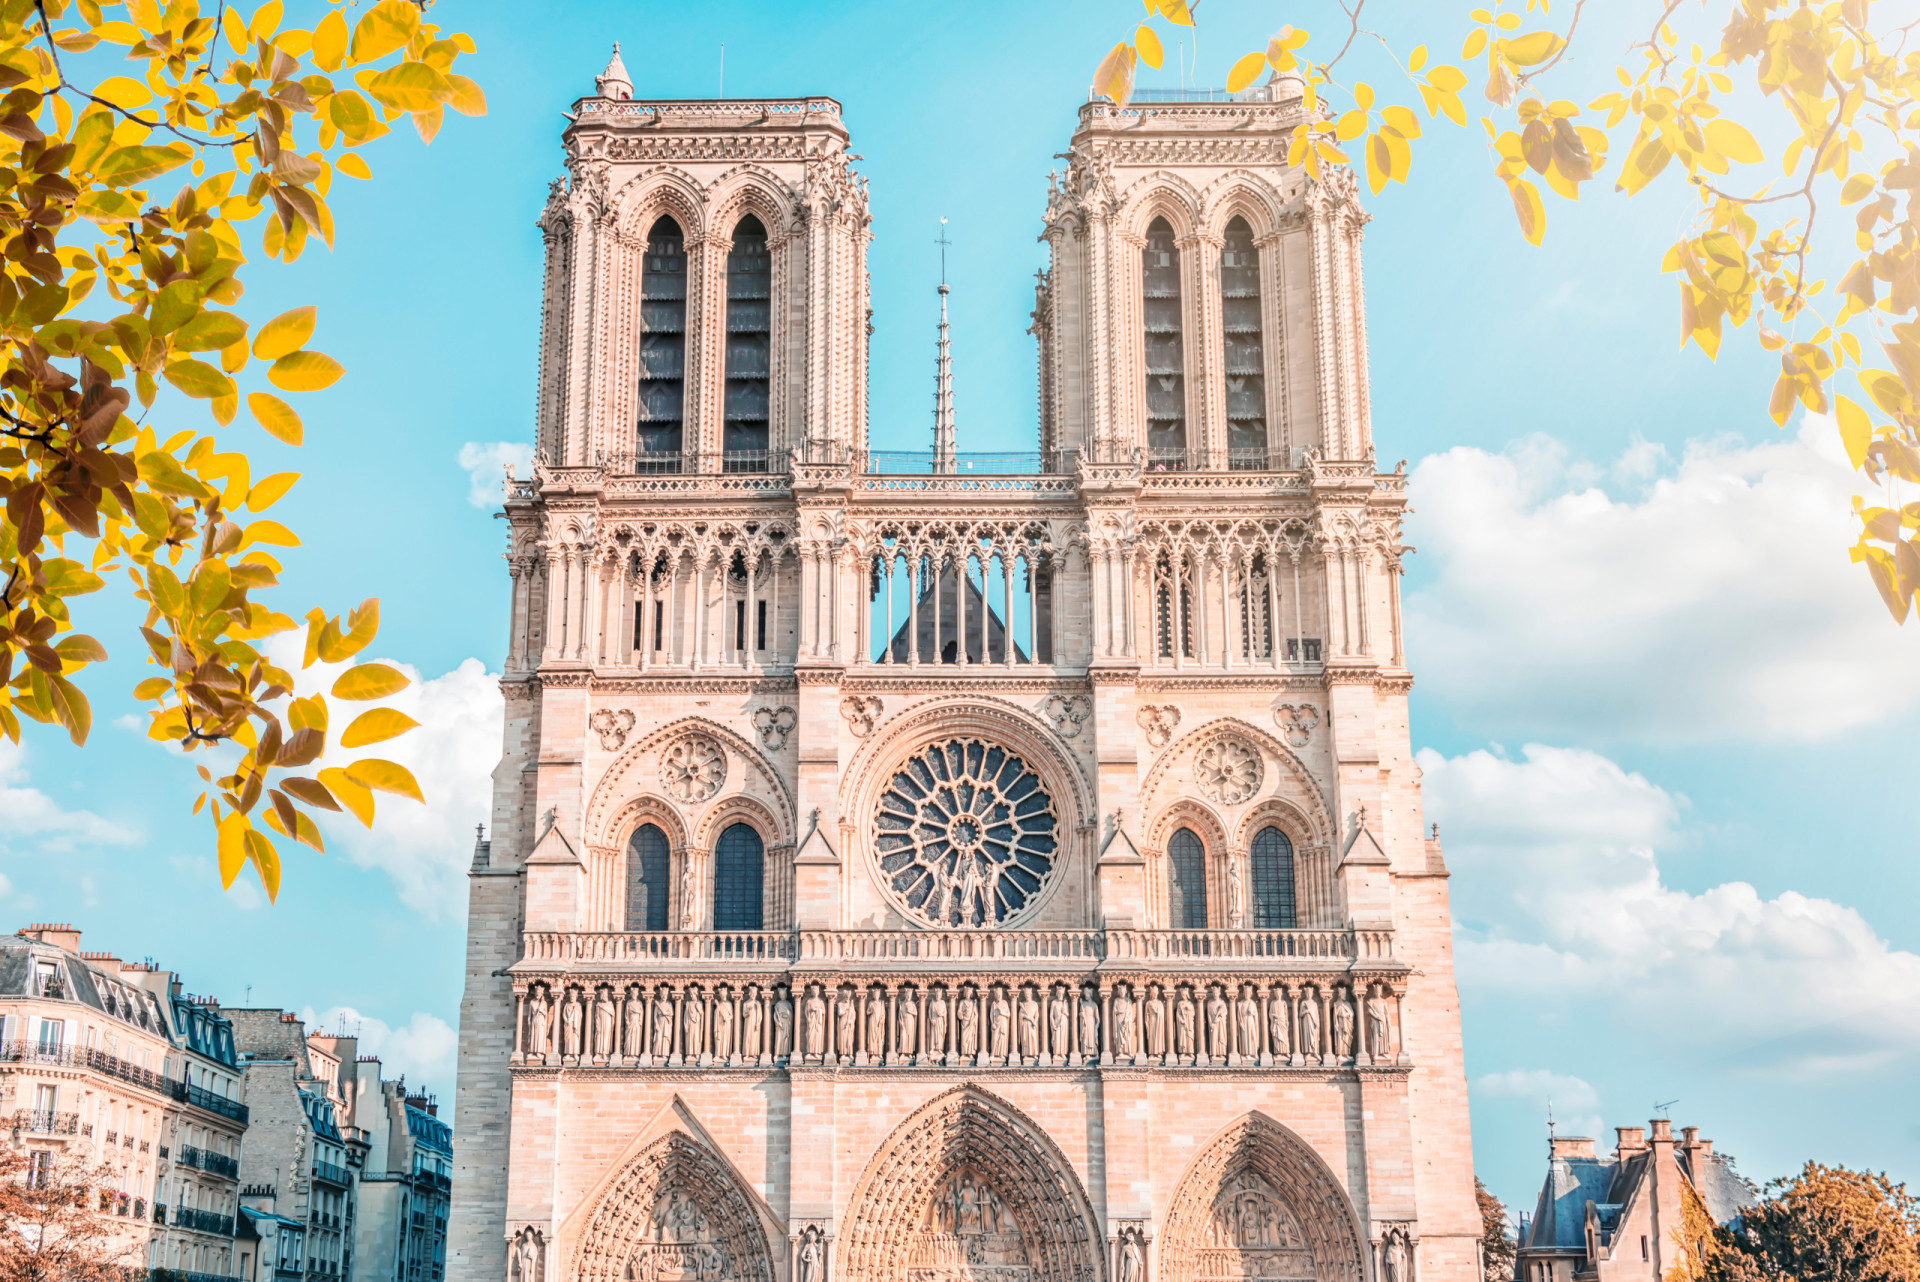 <p>Set to reopen on December 8, 2024, Notre Dame is undergoing meticulous restoration following the devastating 2019 fire, aiming to restore its historical glory.</p><p><a href="https://www.msn.com/en-us/community/channel/vid-7xx8mnucu55yw63we9va2gwr7uihbxwc68fxqp25x6tg4ftibpra?cvid=94631541bc0f4f89bfd59158d696ad7e">Follow us and access great exclusive content every day</a></p>